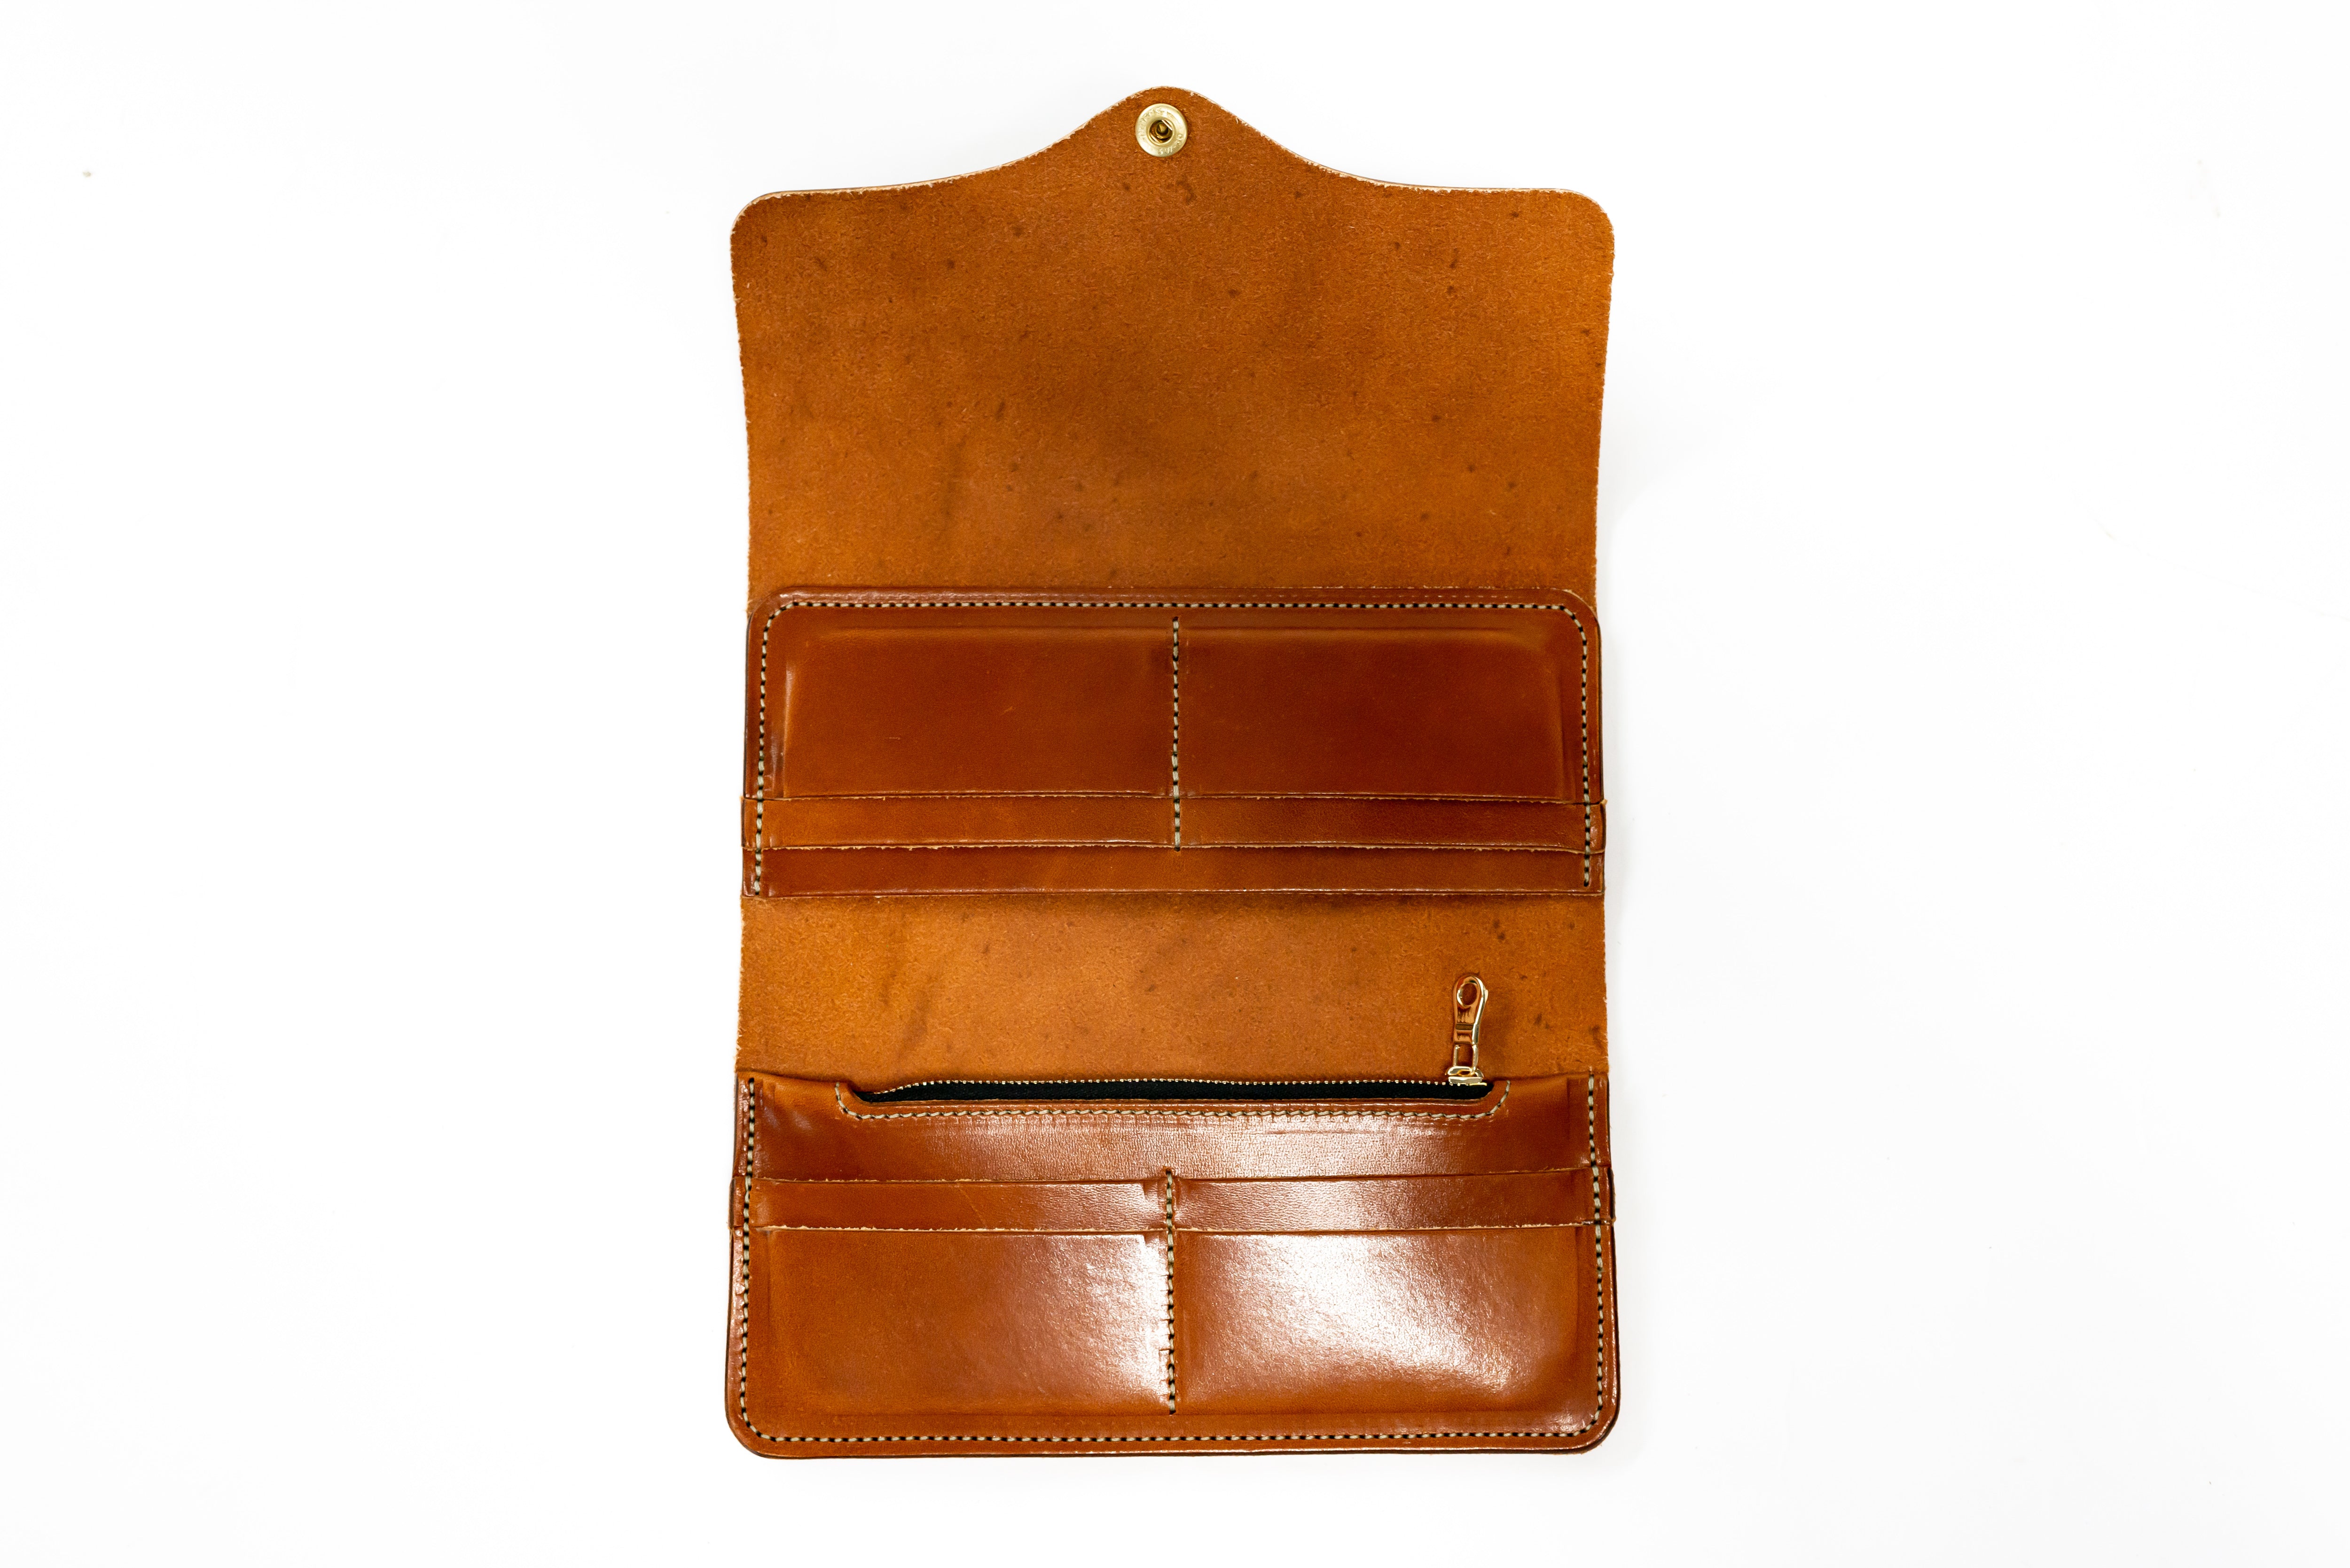 1642 Large Flap Over Leather Purse with Tab by Lichfield Leather | App Test